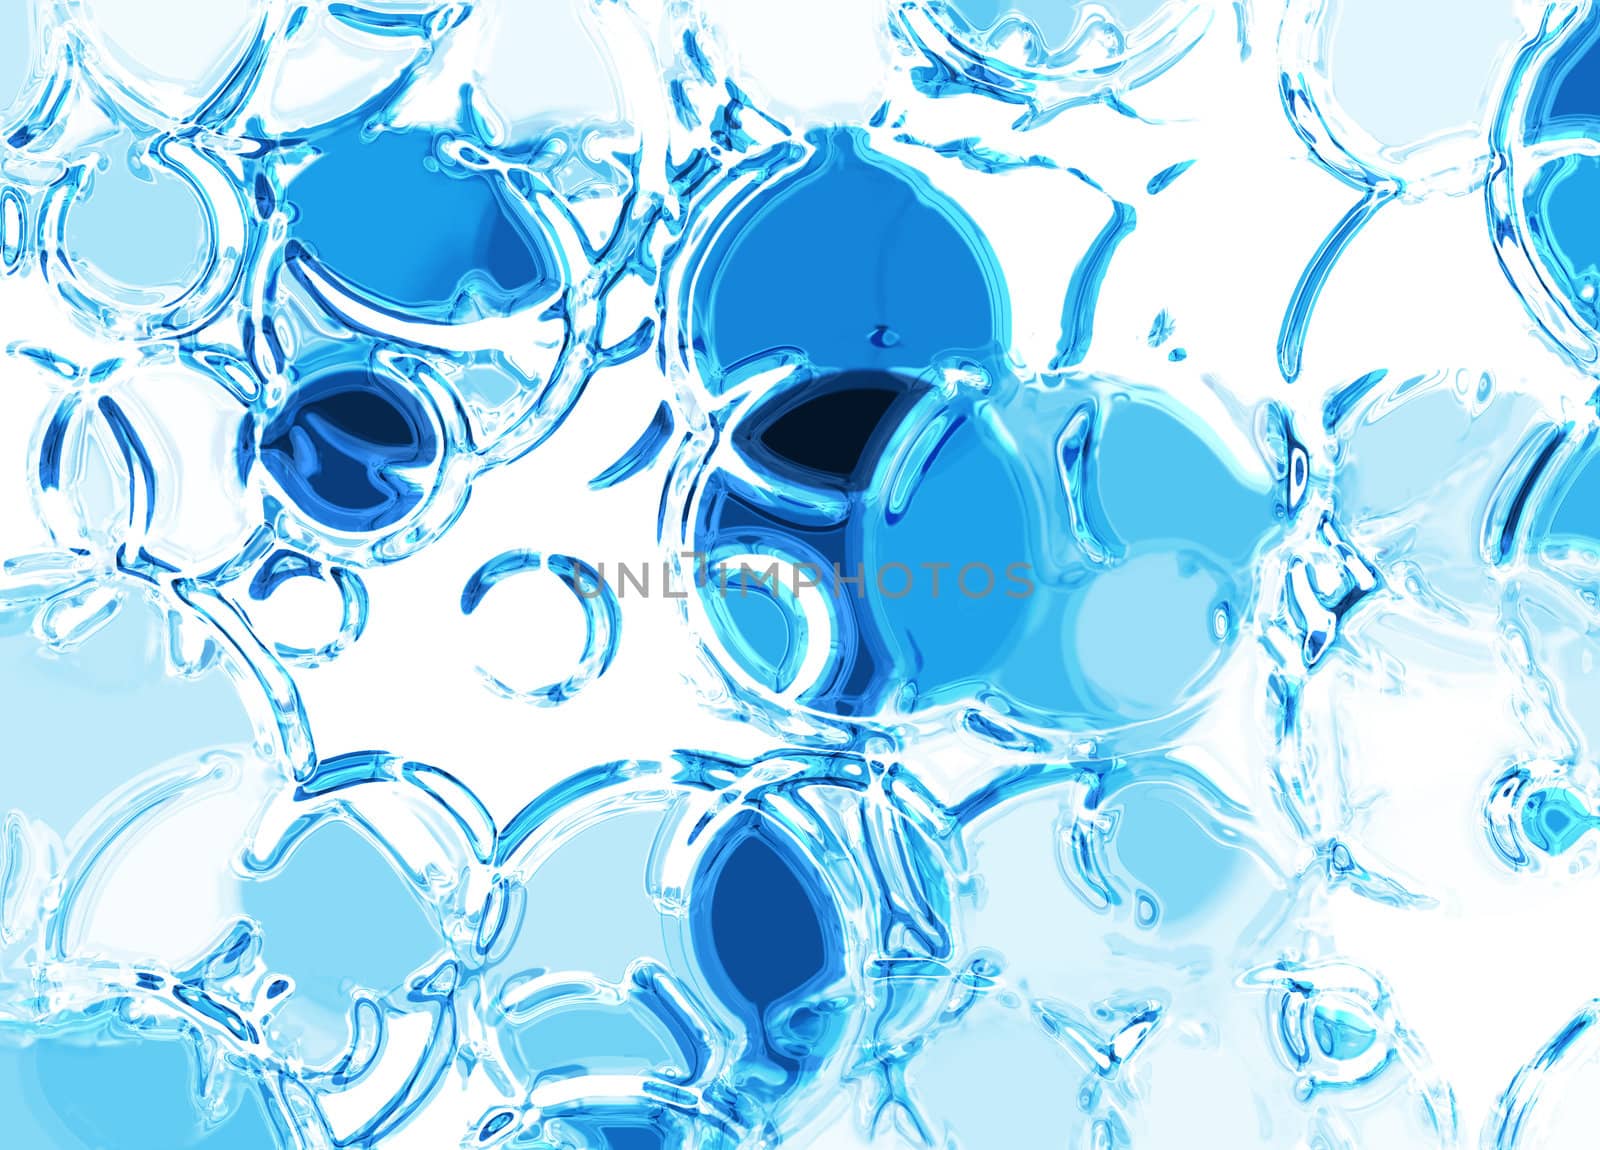 abstract water background by jonnysek